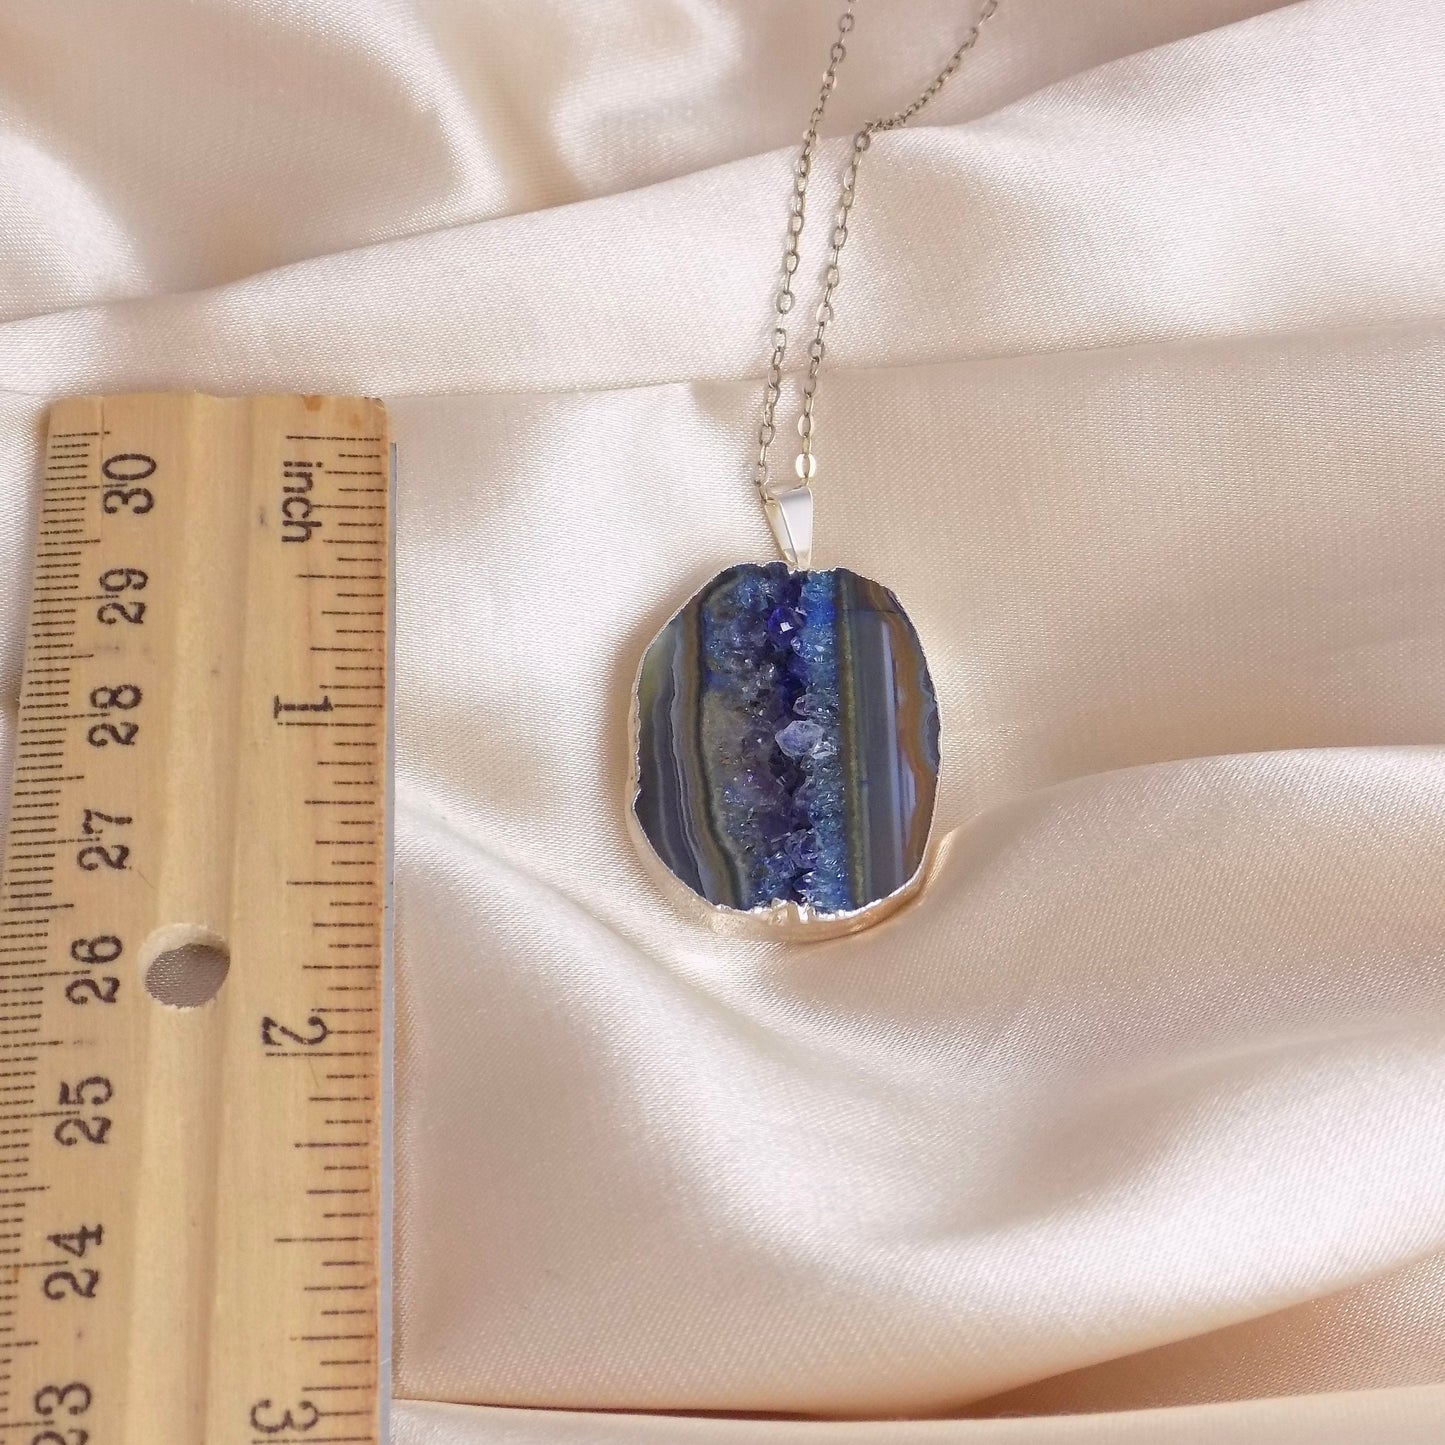 Blue Geode Necklace Silver, Druzy Necklace For Women, Gifts For Mom, G14-849